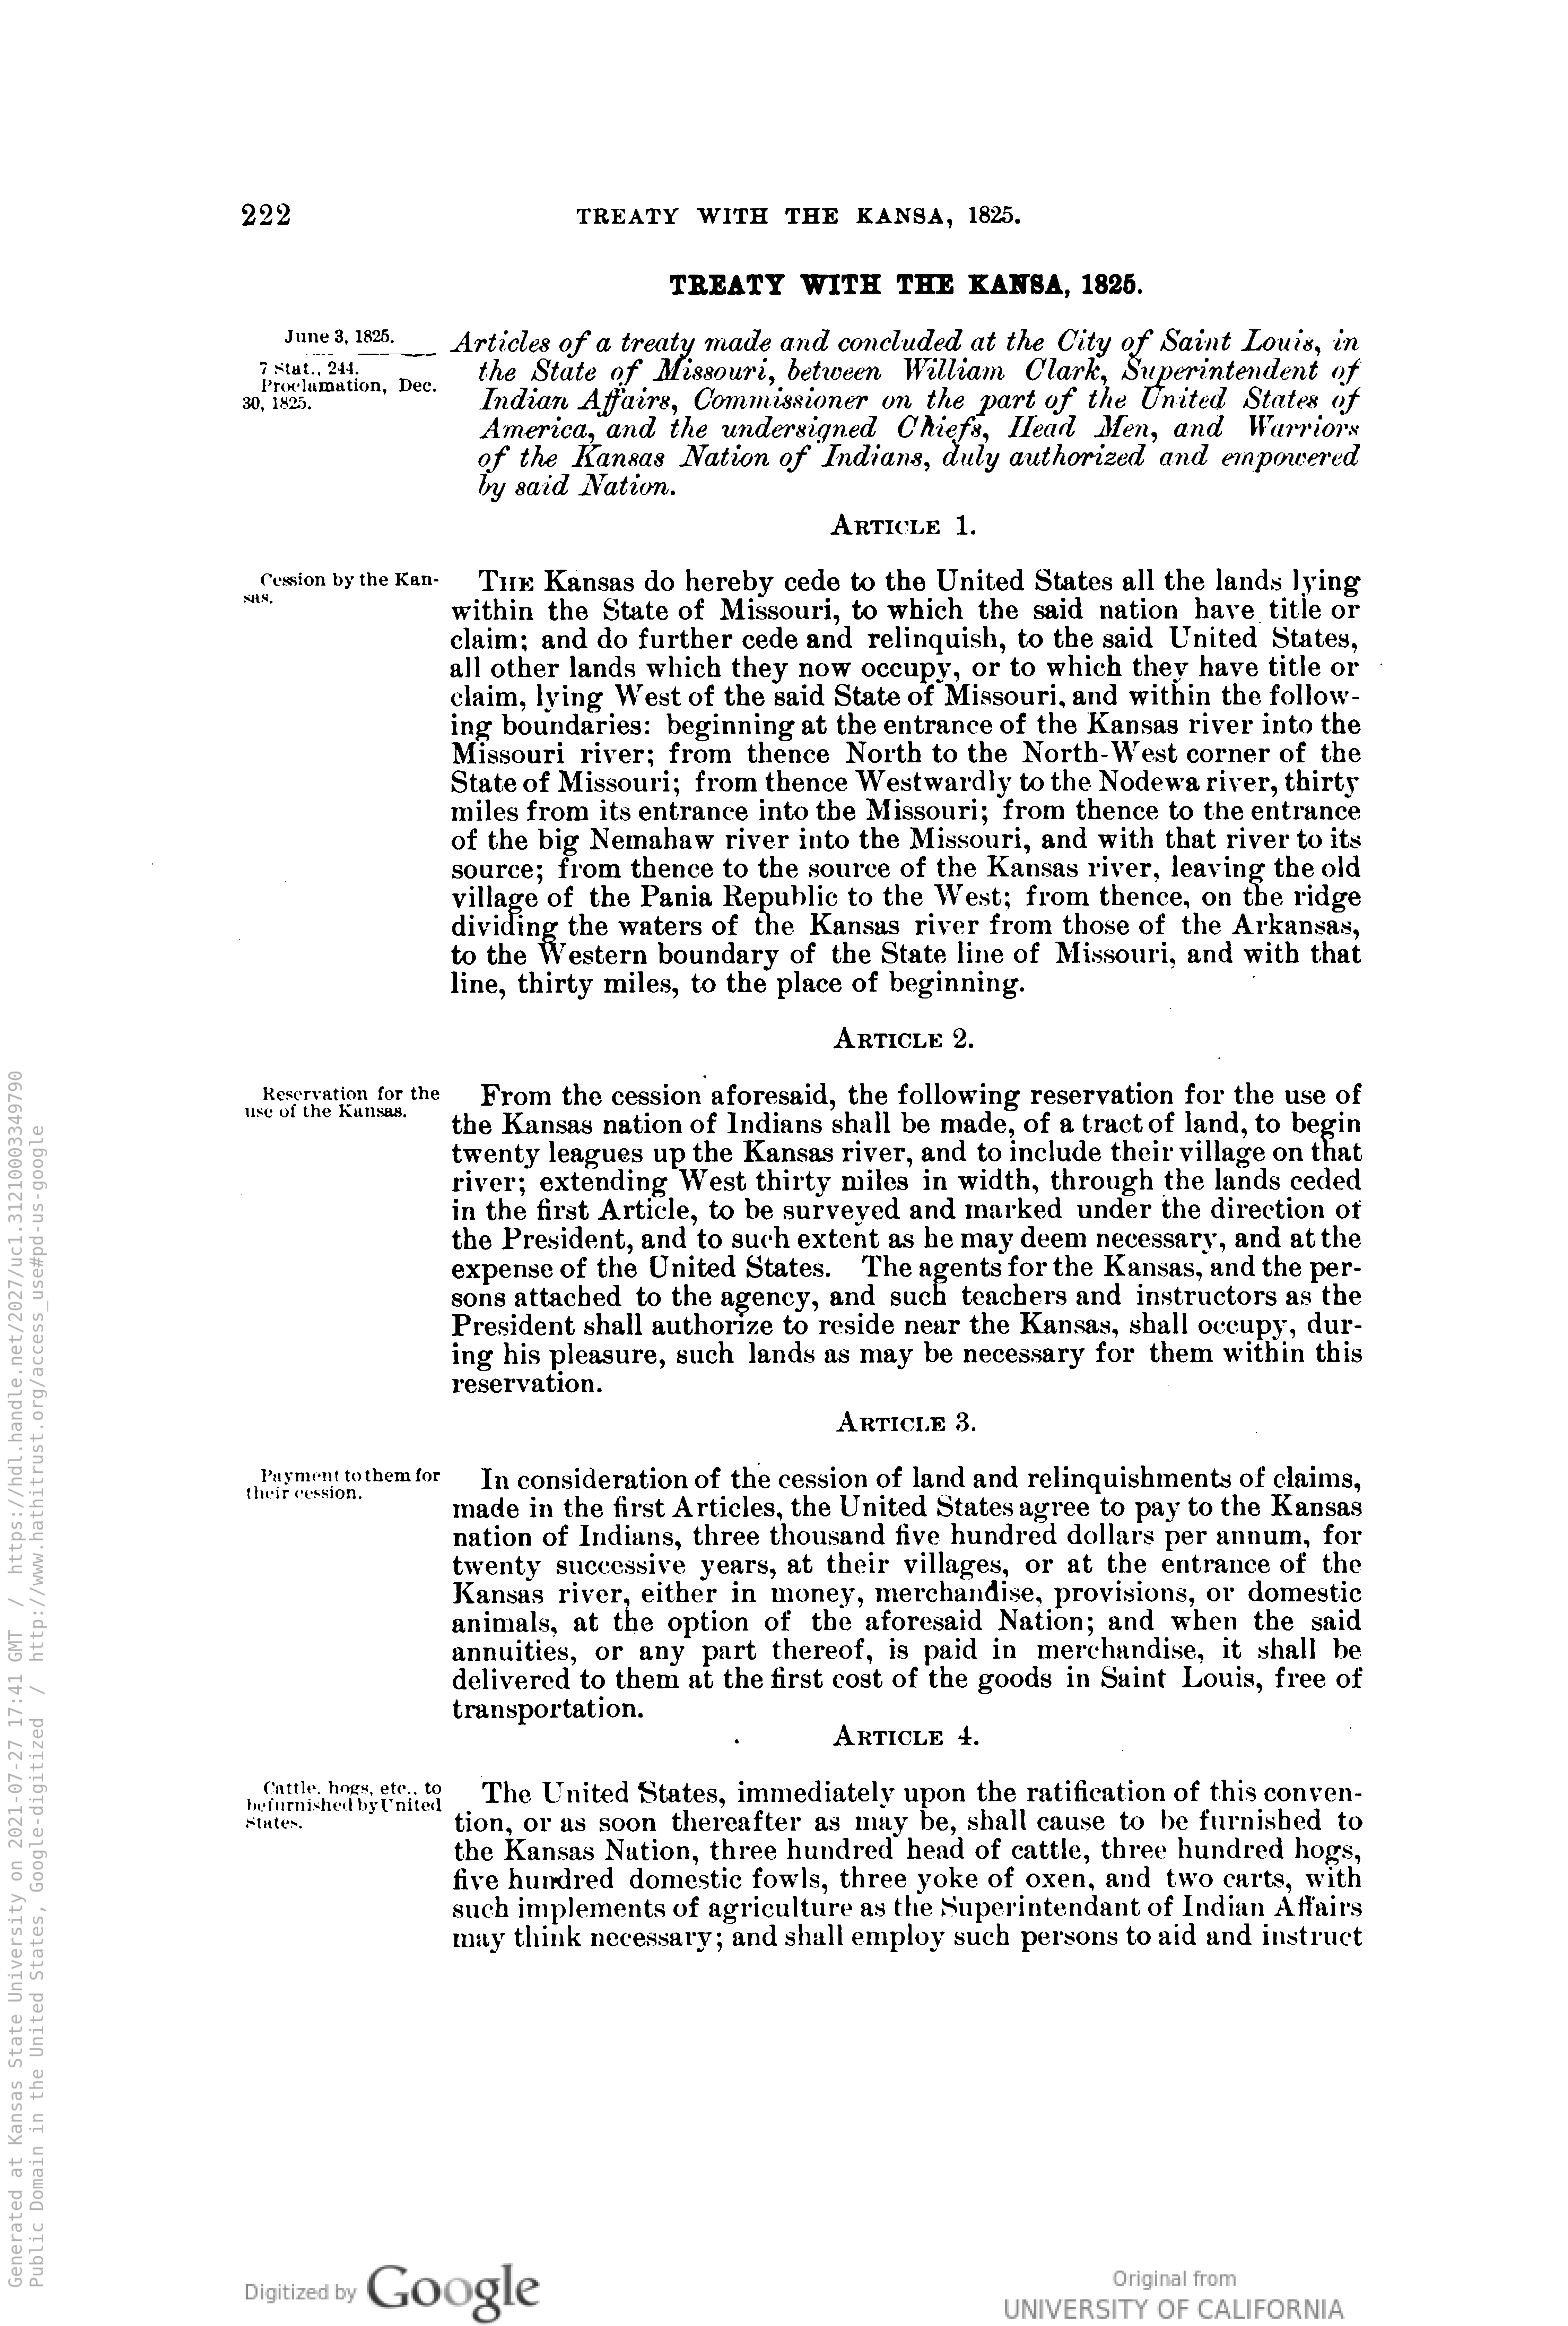 Treaty of 1825, Page 1